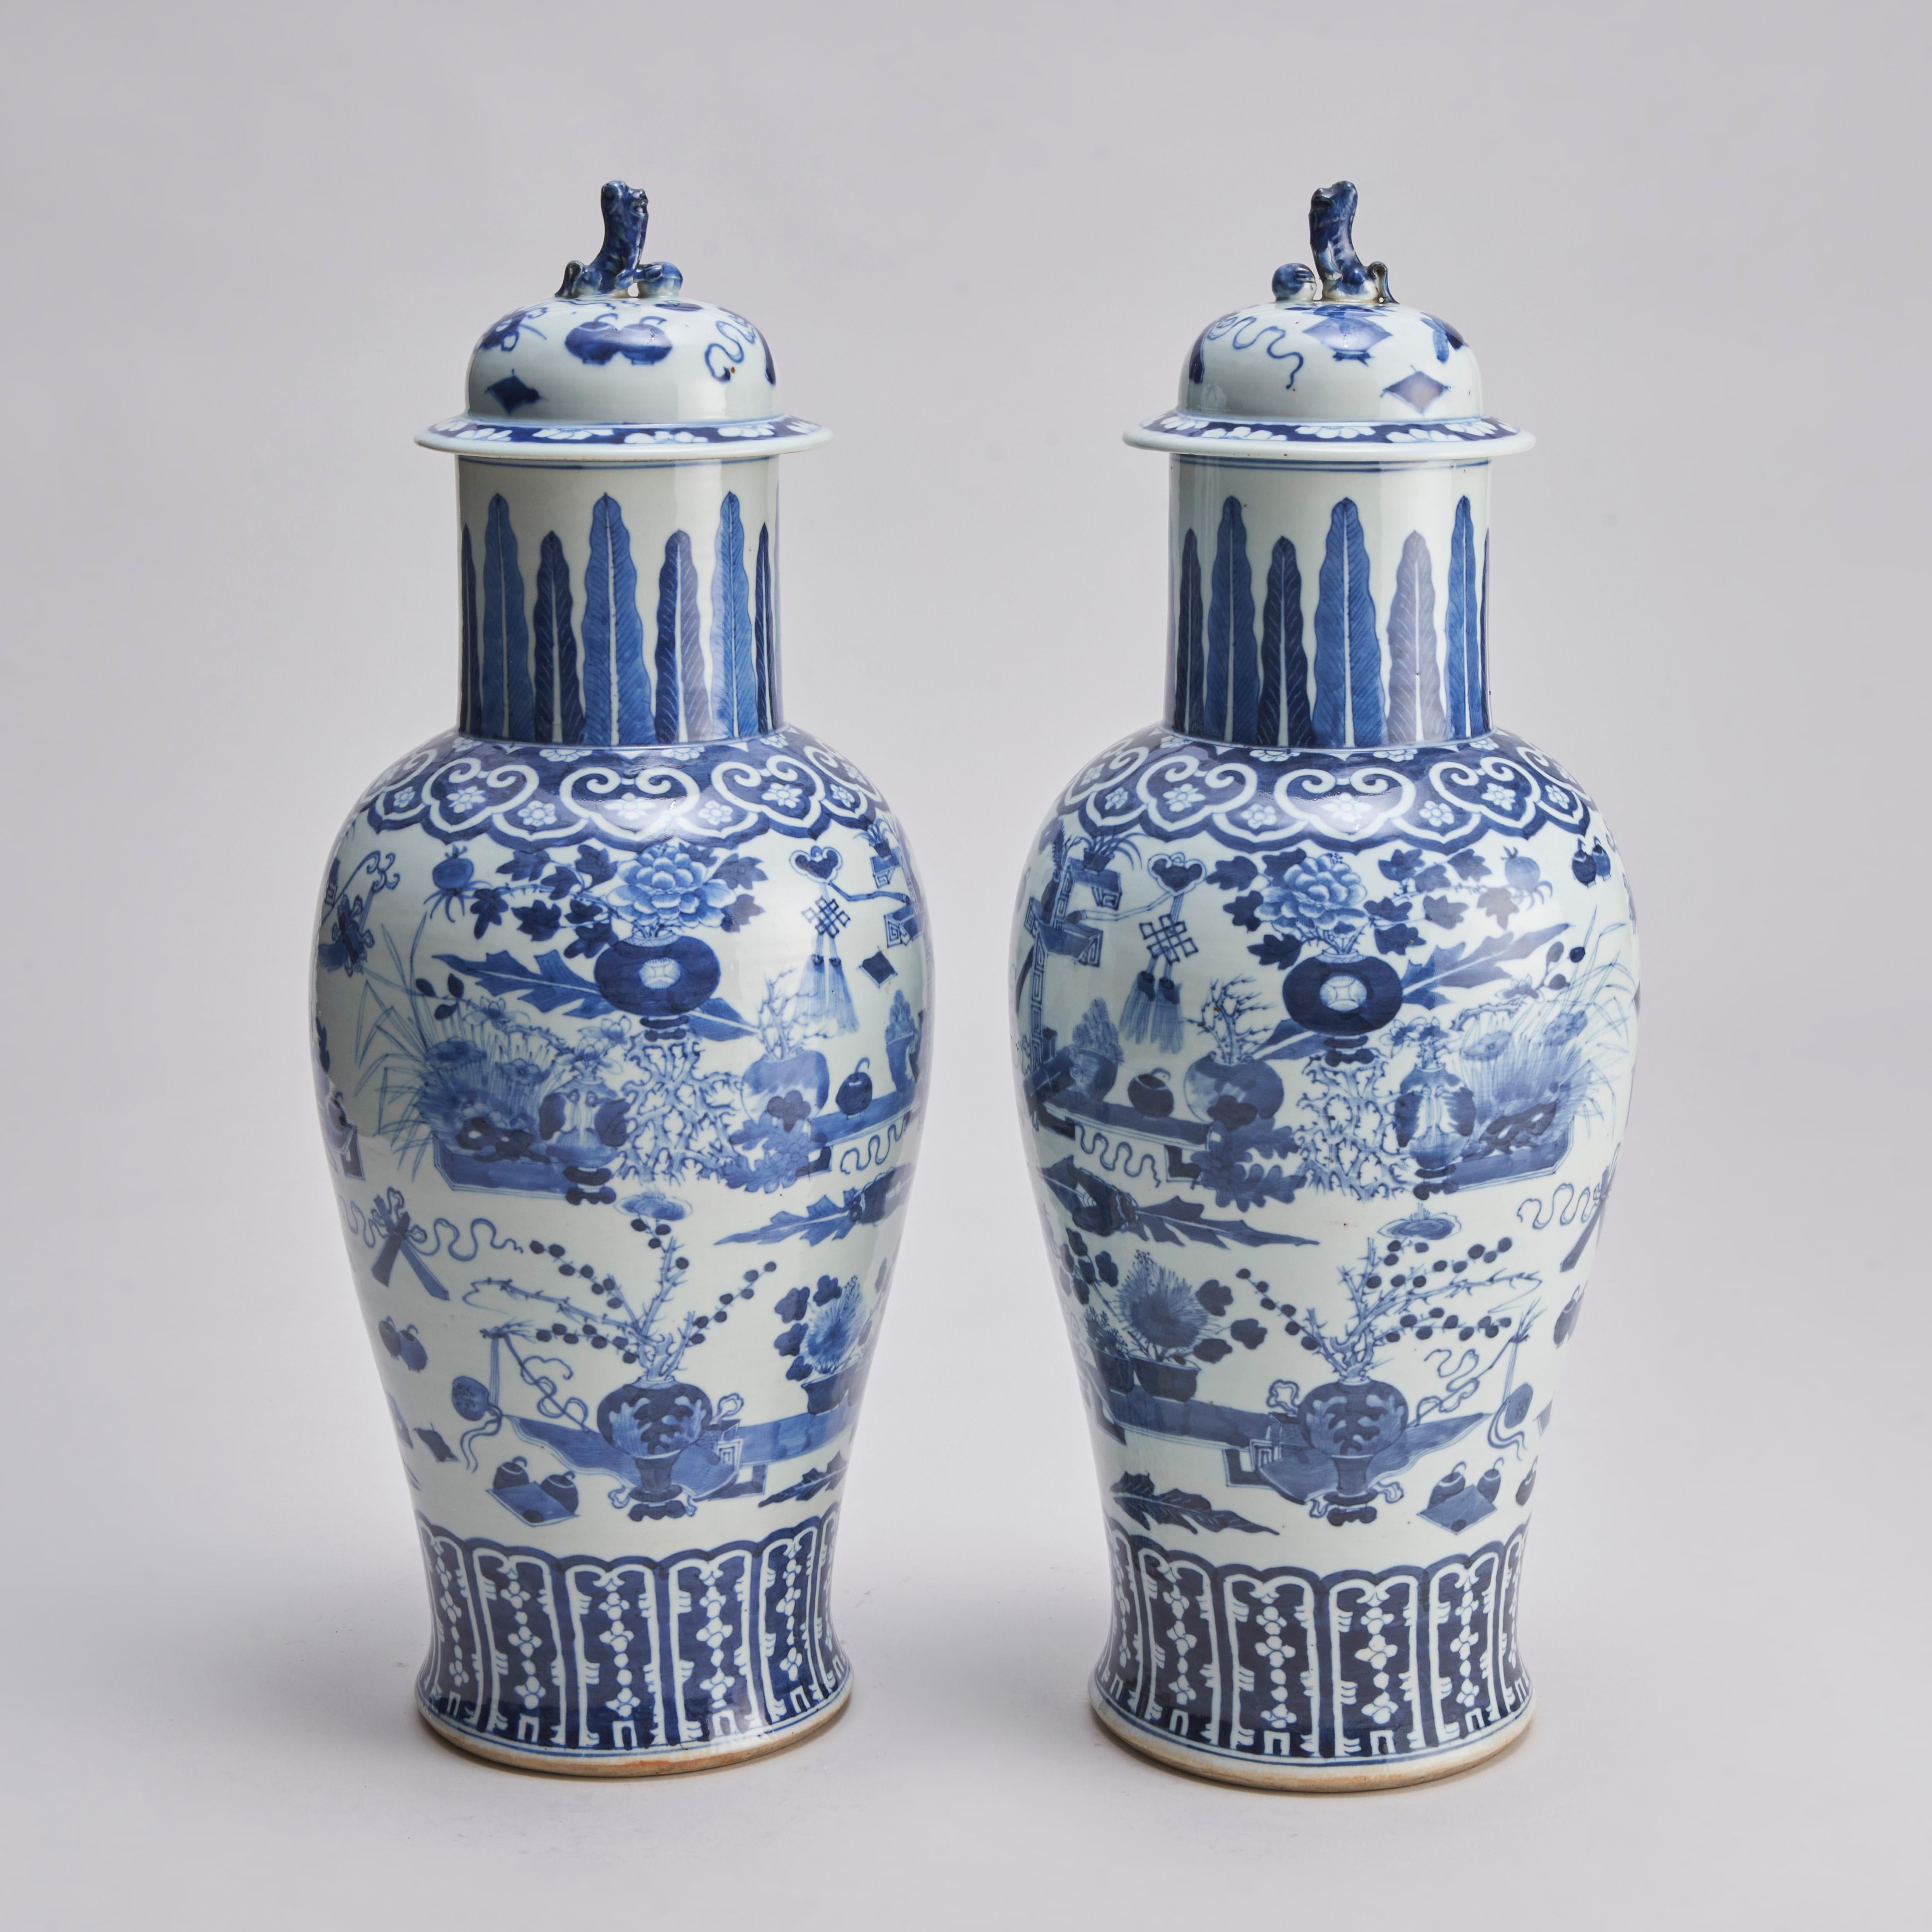 A pair of 19th century Chinese blue and white vases with fine decoration of floral displays and precious scholarly objects such as scrolls, vases, floral displays and writing implements and a Penzai (minature tree known as bonsai in Japan).

The